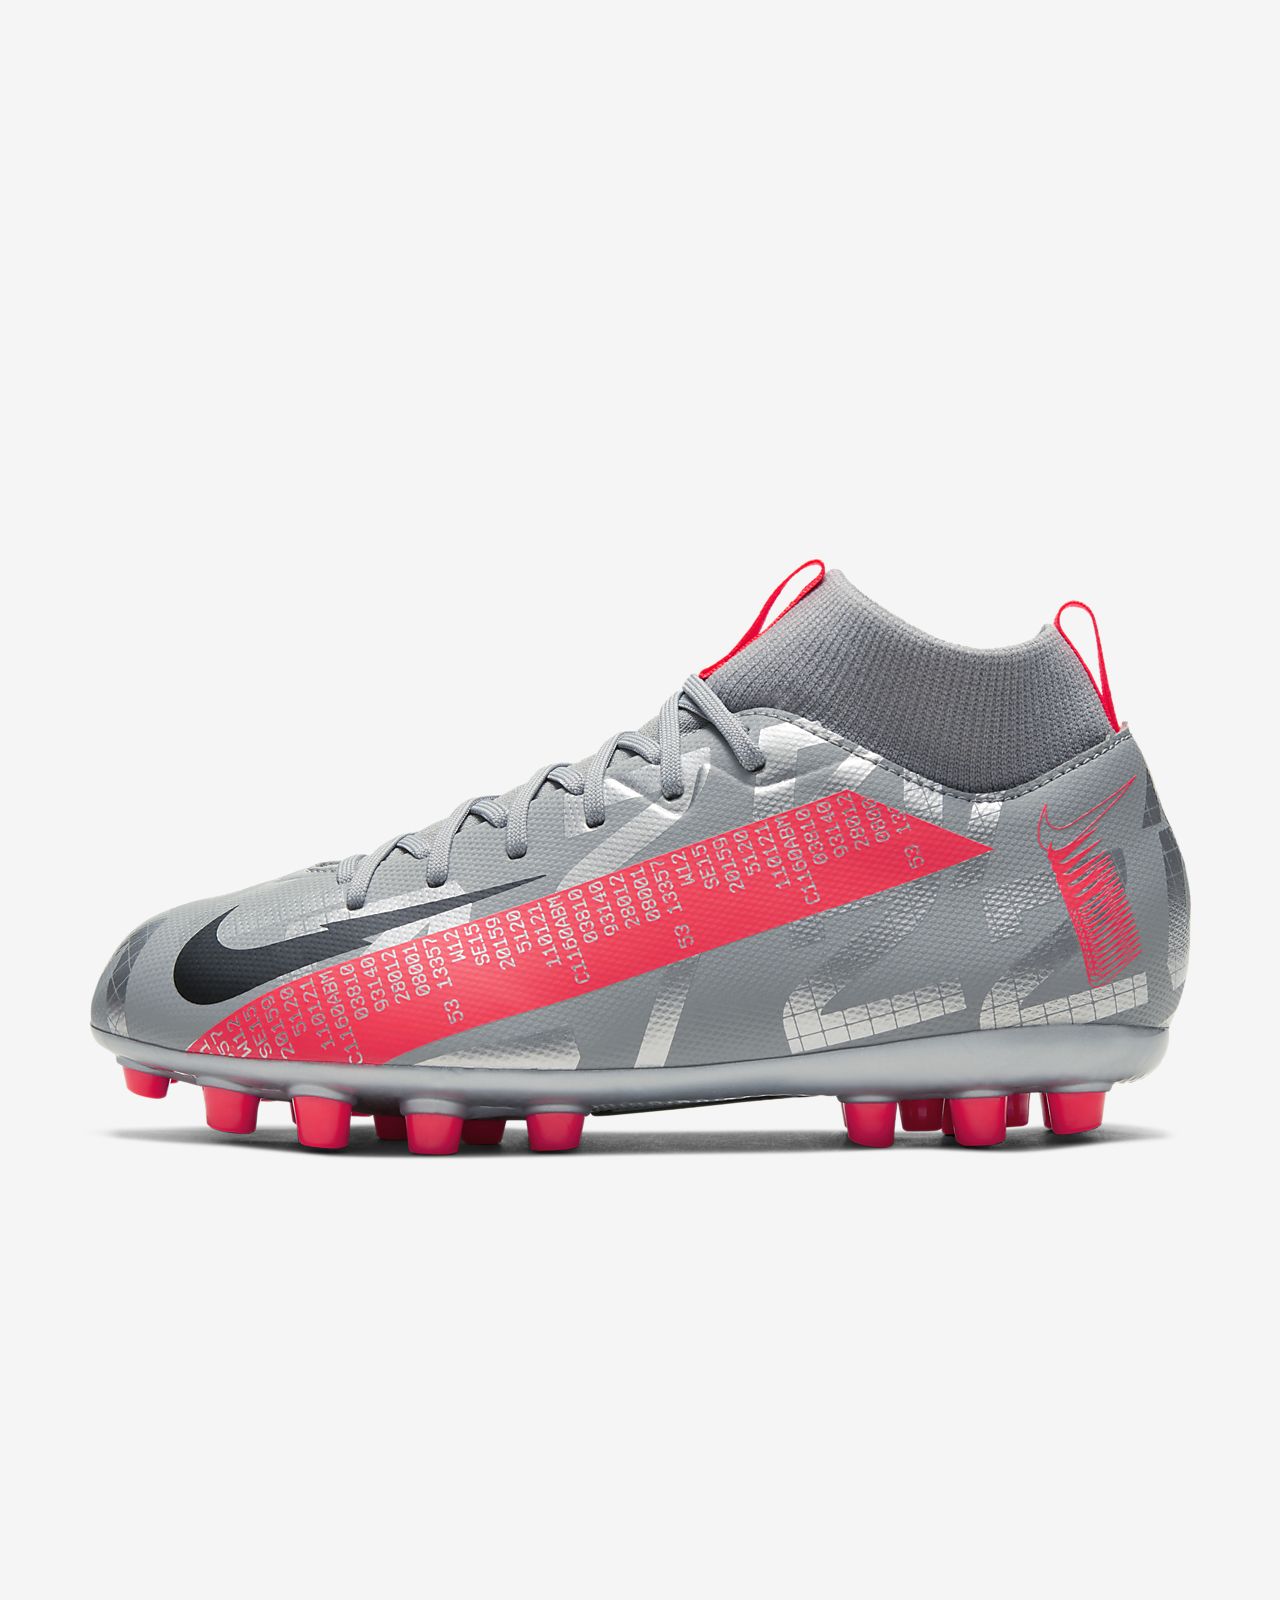 Nike Superfly 7 Academy SG Pro AC Football shoes for.